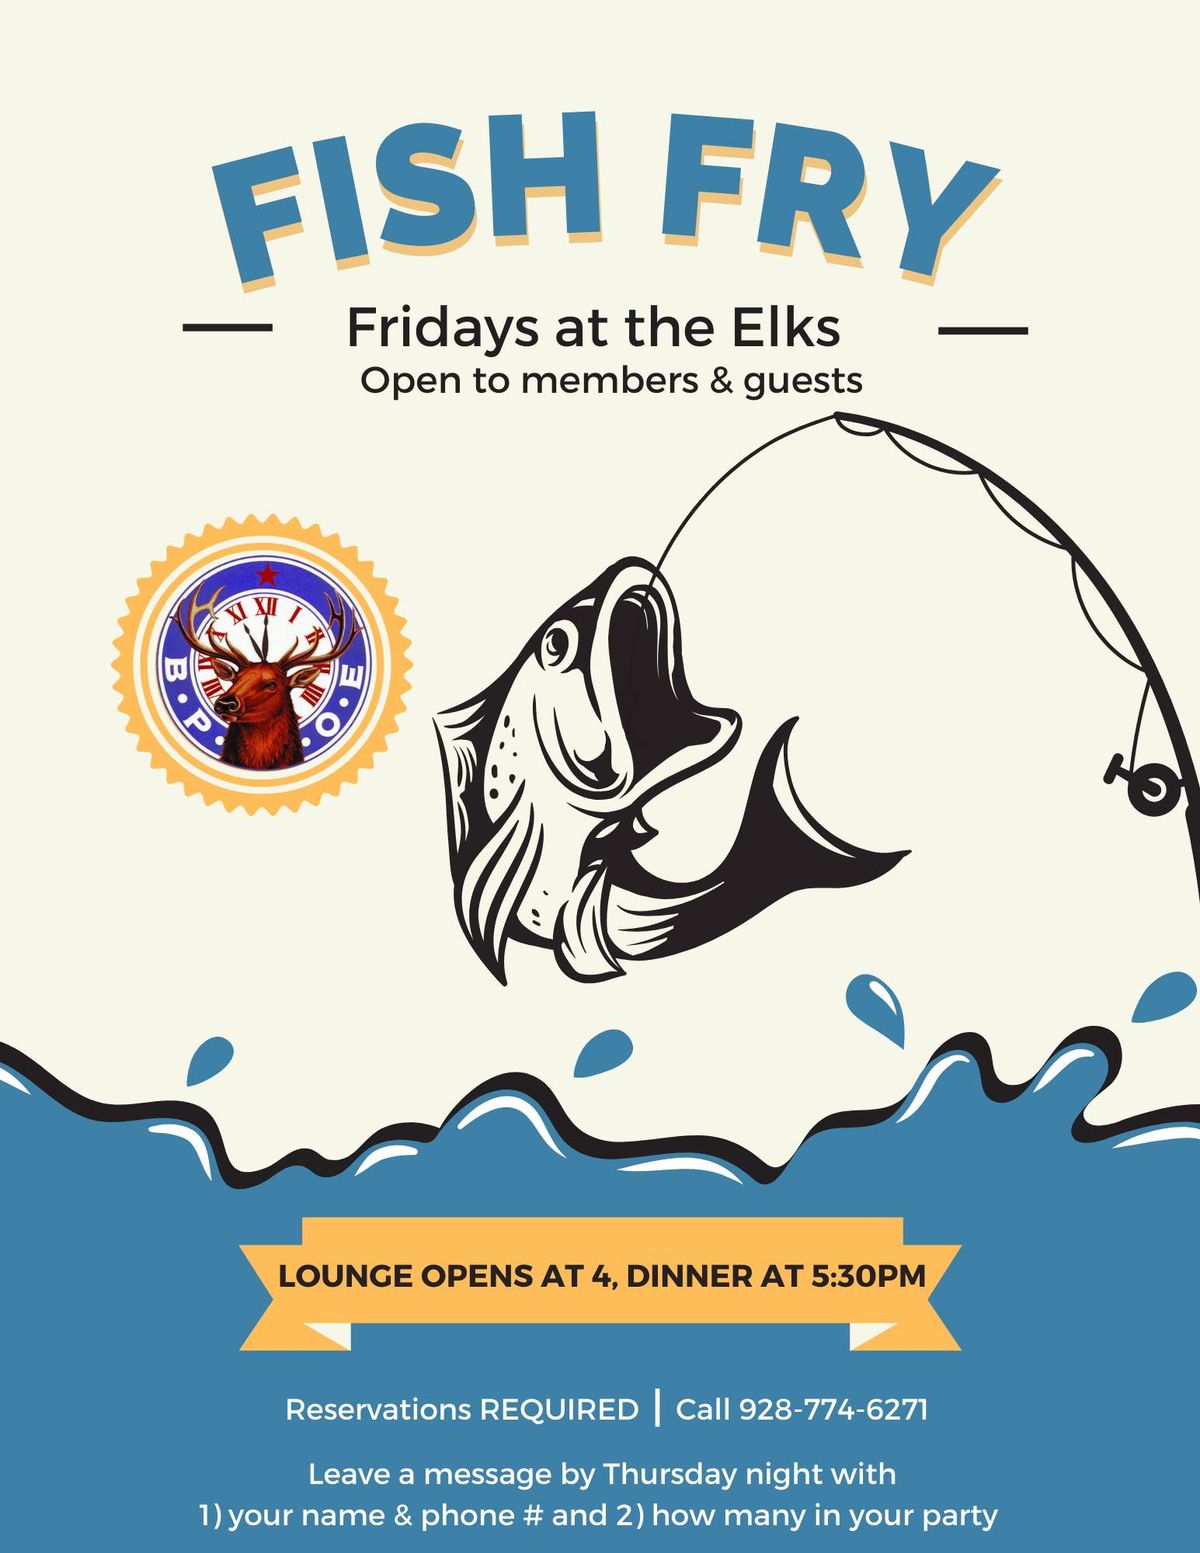 Fish Fry Friday at the Elks (Open to Members & Guests, Reservations Required)